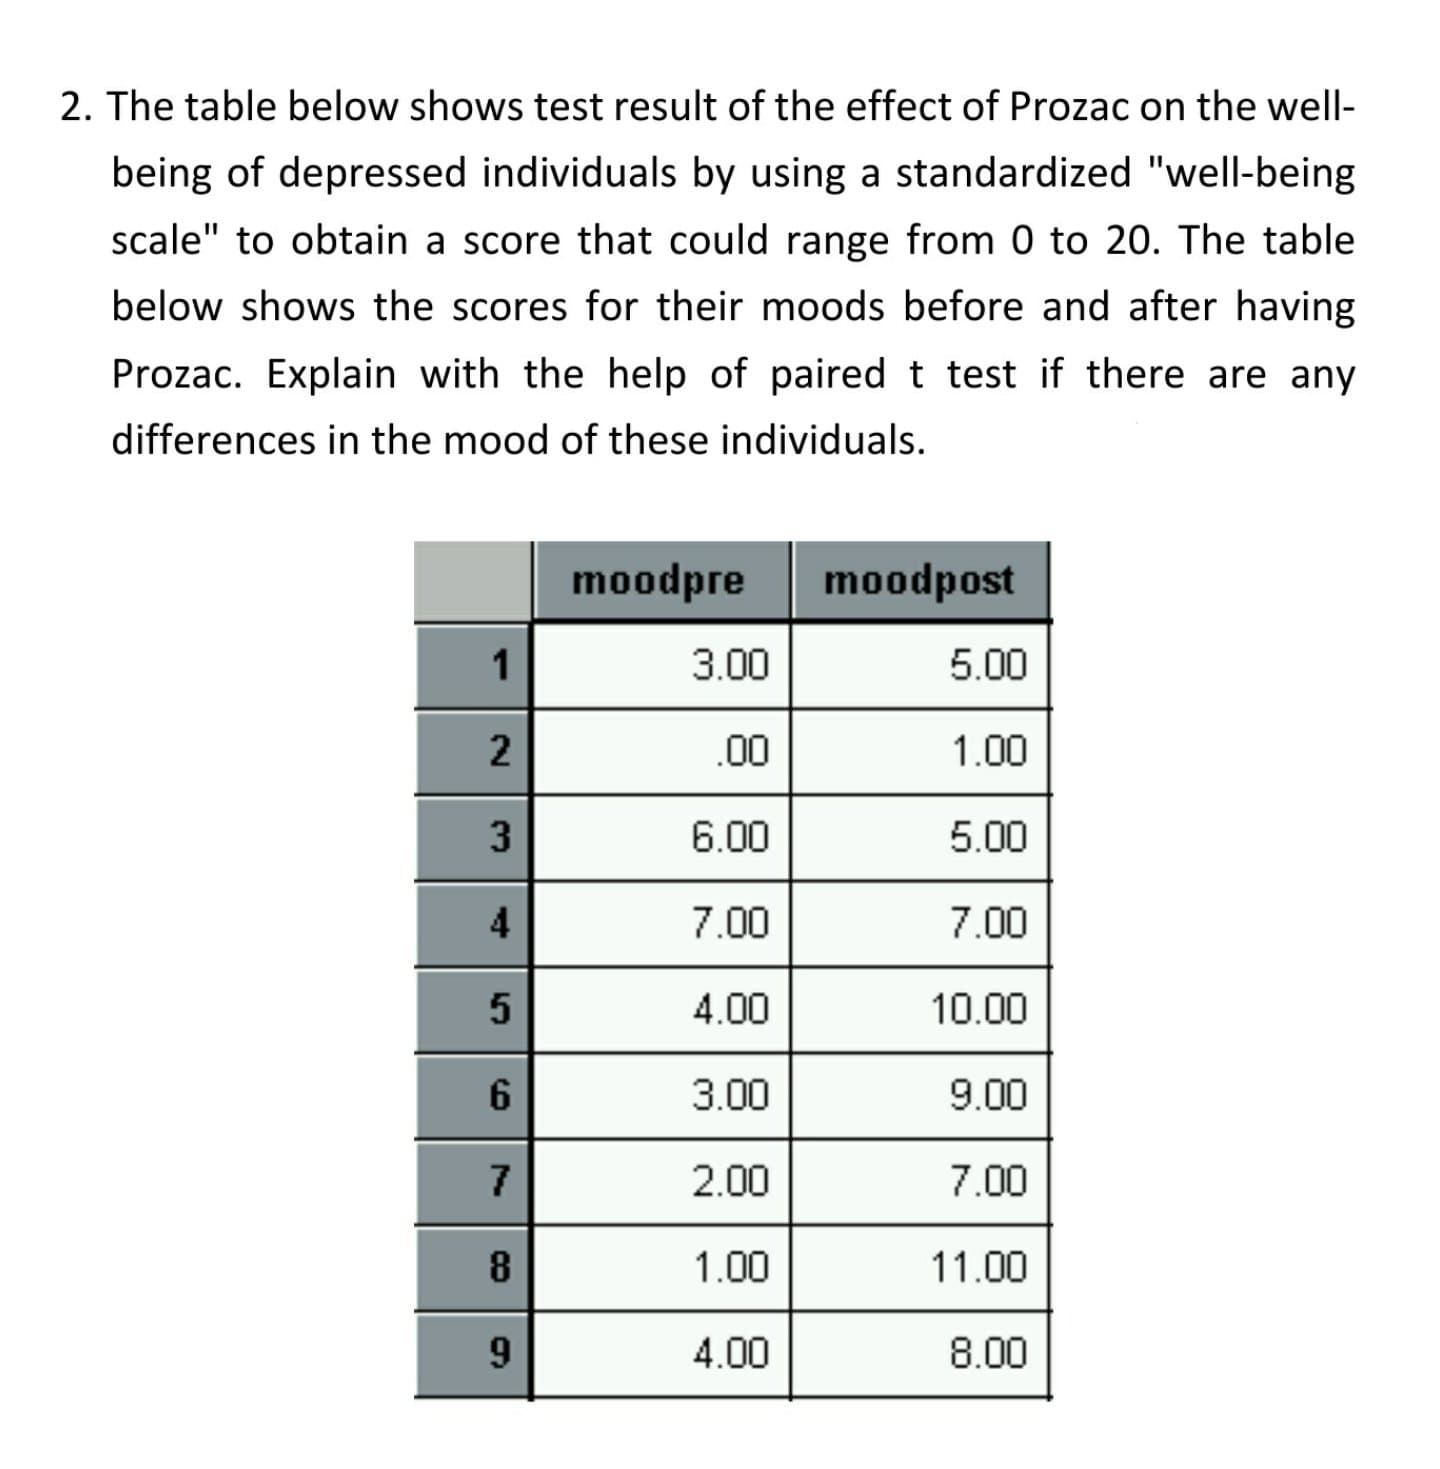 The table below shows test result of the effect of Prozac on the well-
being of depressed individuals by using a standardized "well-being
scale" to obtain a score that could range from 0 to 20. The table
below shows the scores for their moods before and after having
Prozac. Explain with the help of paired t test if there are any
differences in the mood of these individuals.
